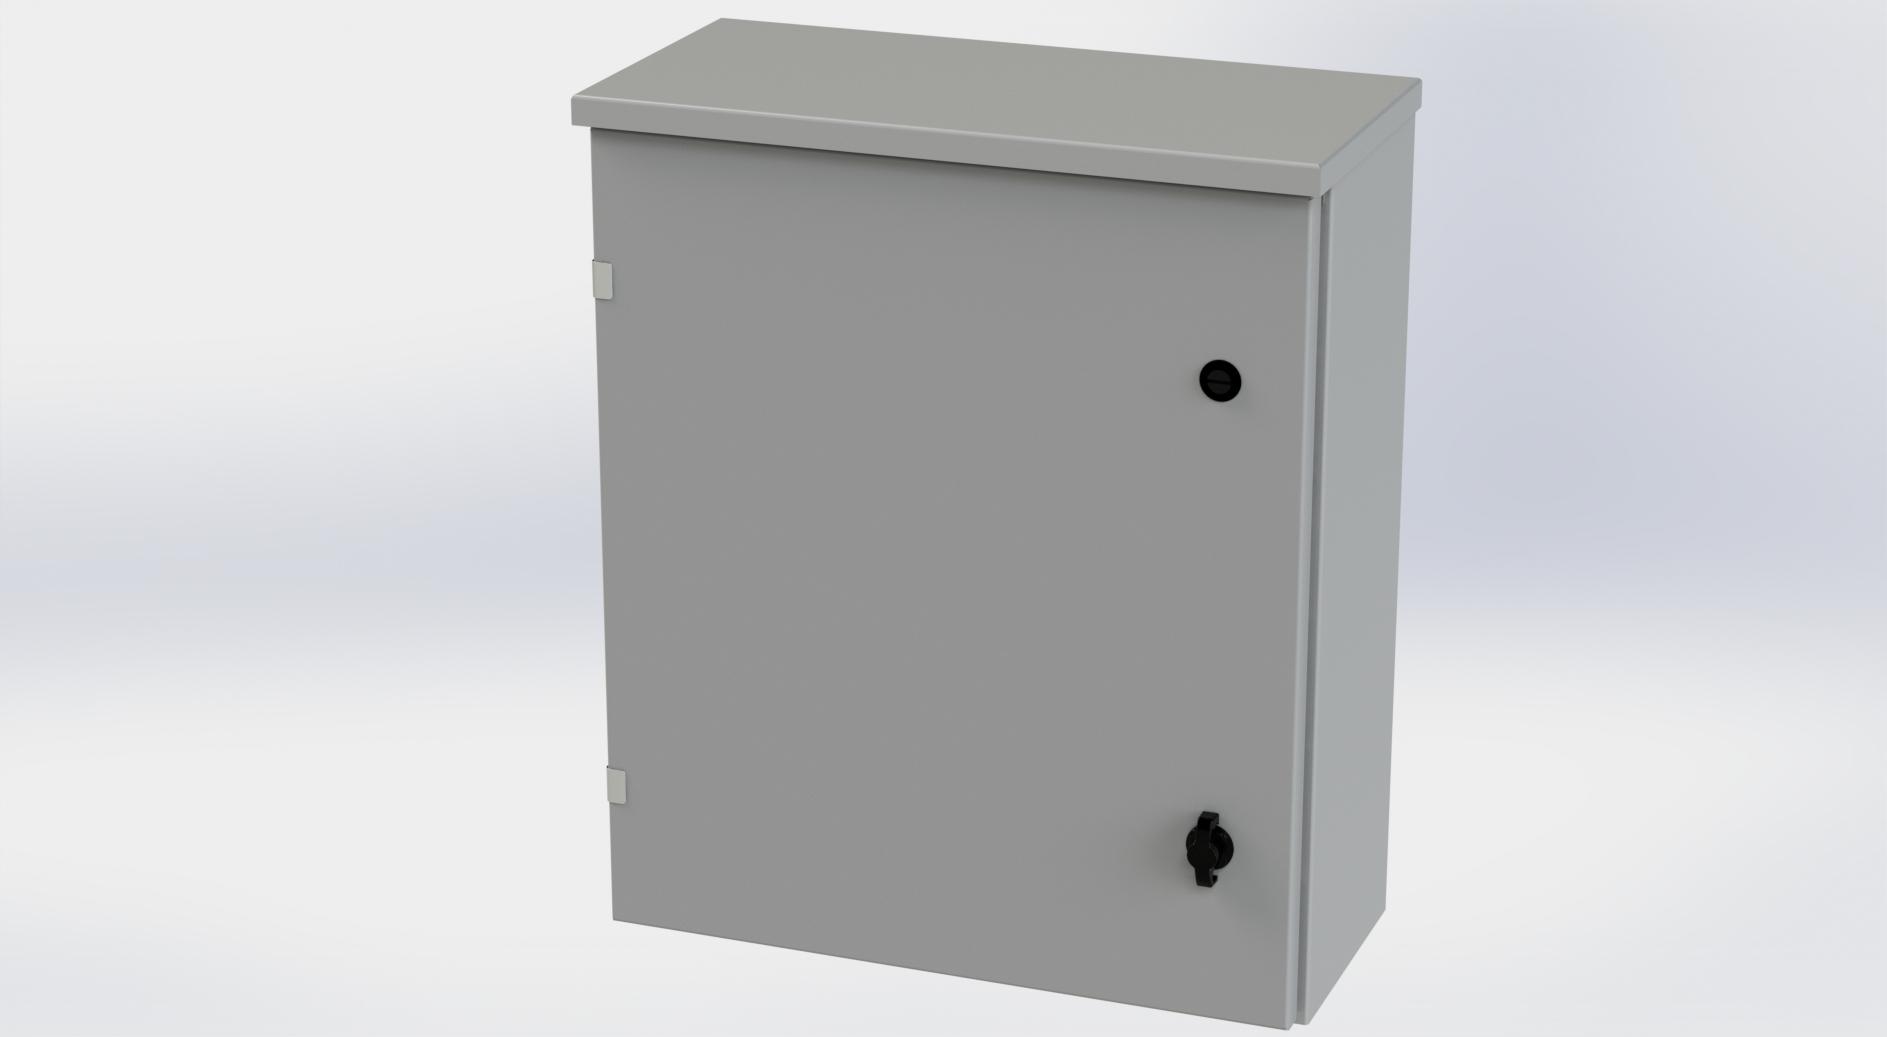 Saginaw Control SCE-24R2008LP Type-3R Hinged Cover Enclosure, Height:24.00", Width:20.00", Depth:8.00", ANSI-61 gray powder coating inside and out. Optional sub-panels are powder coated white.